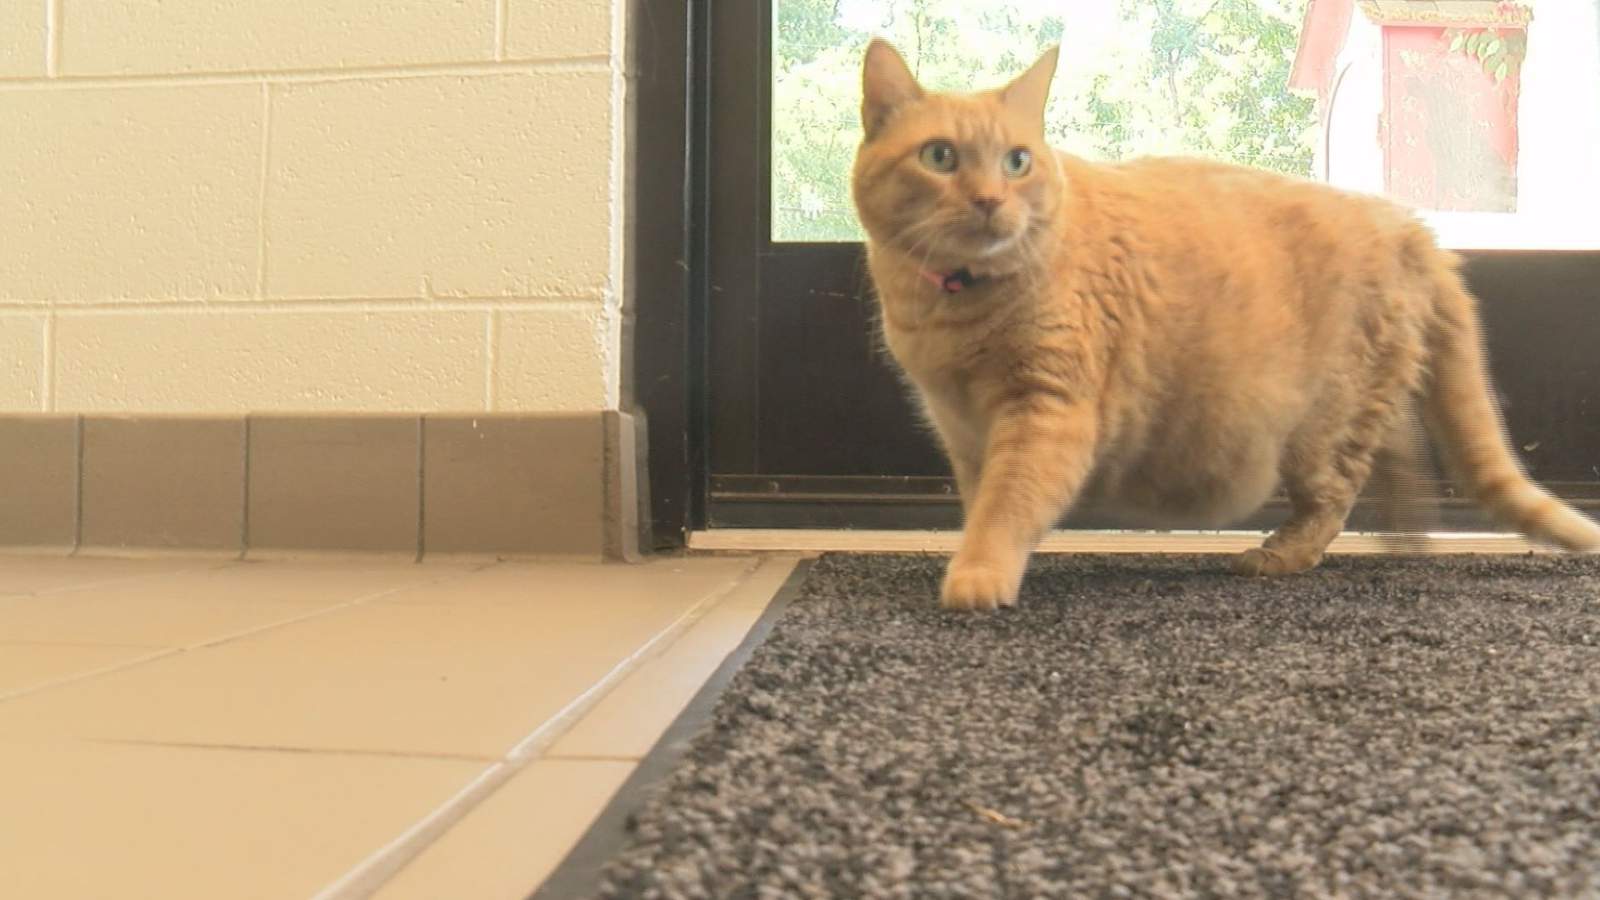 Roanoke fat cat, twice surrendered, may finally have found furever home